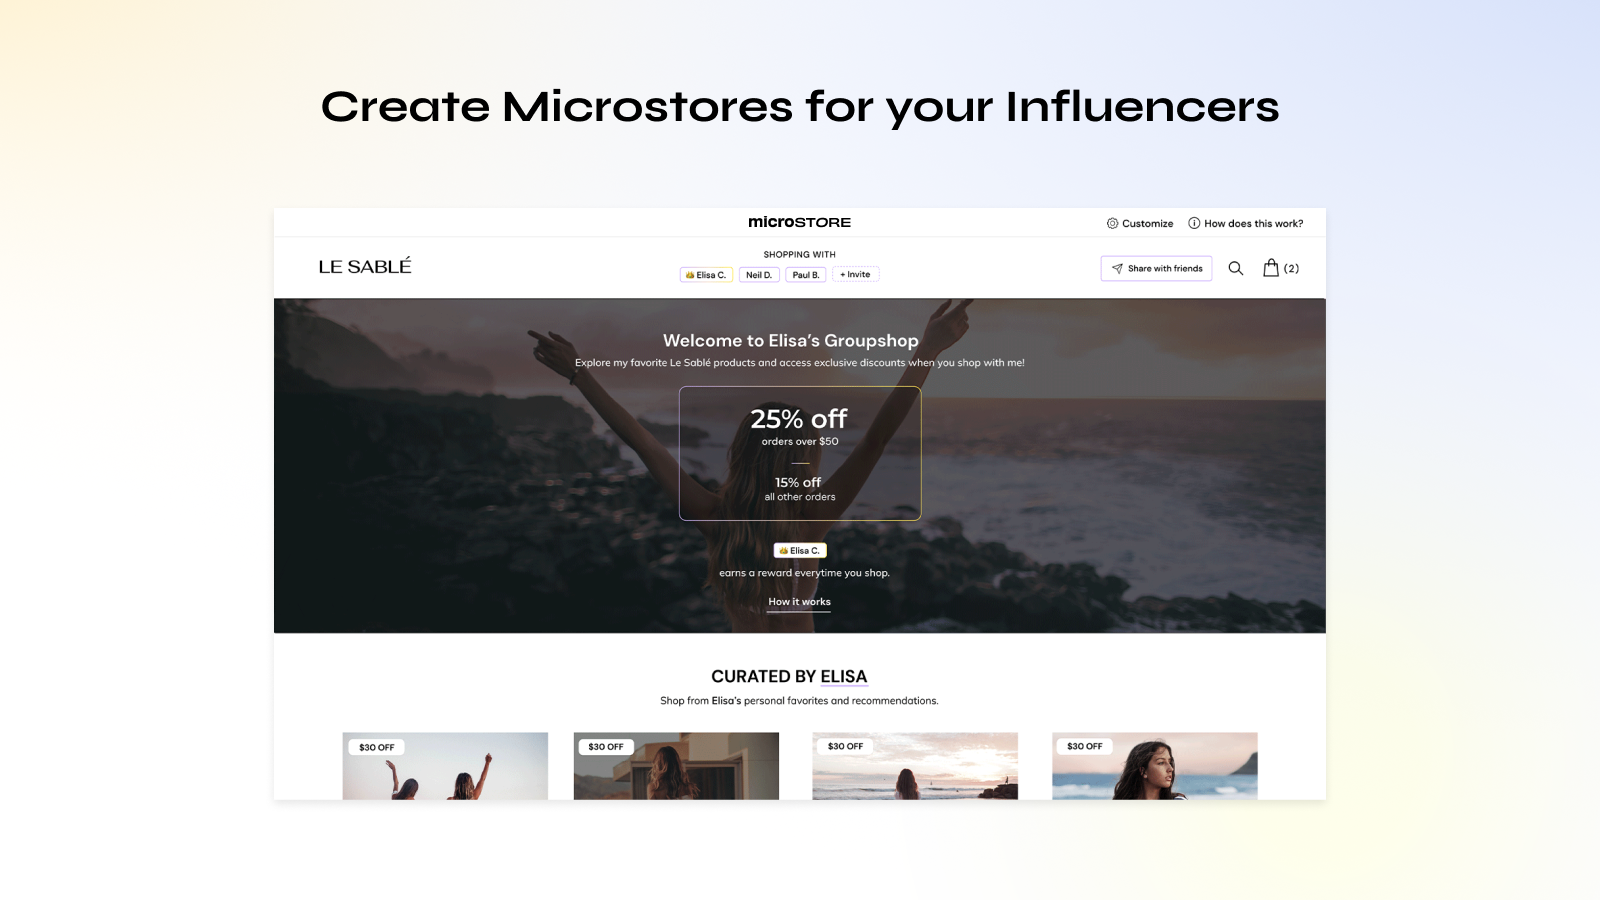 Create Microstores for your influencers